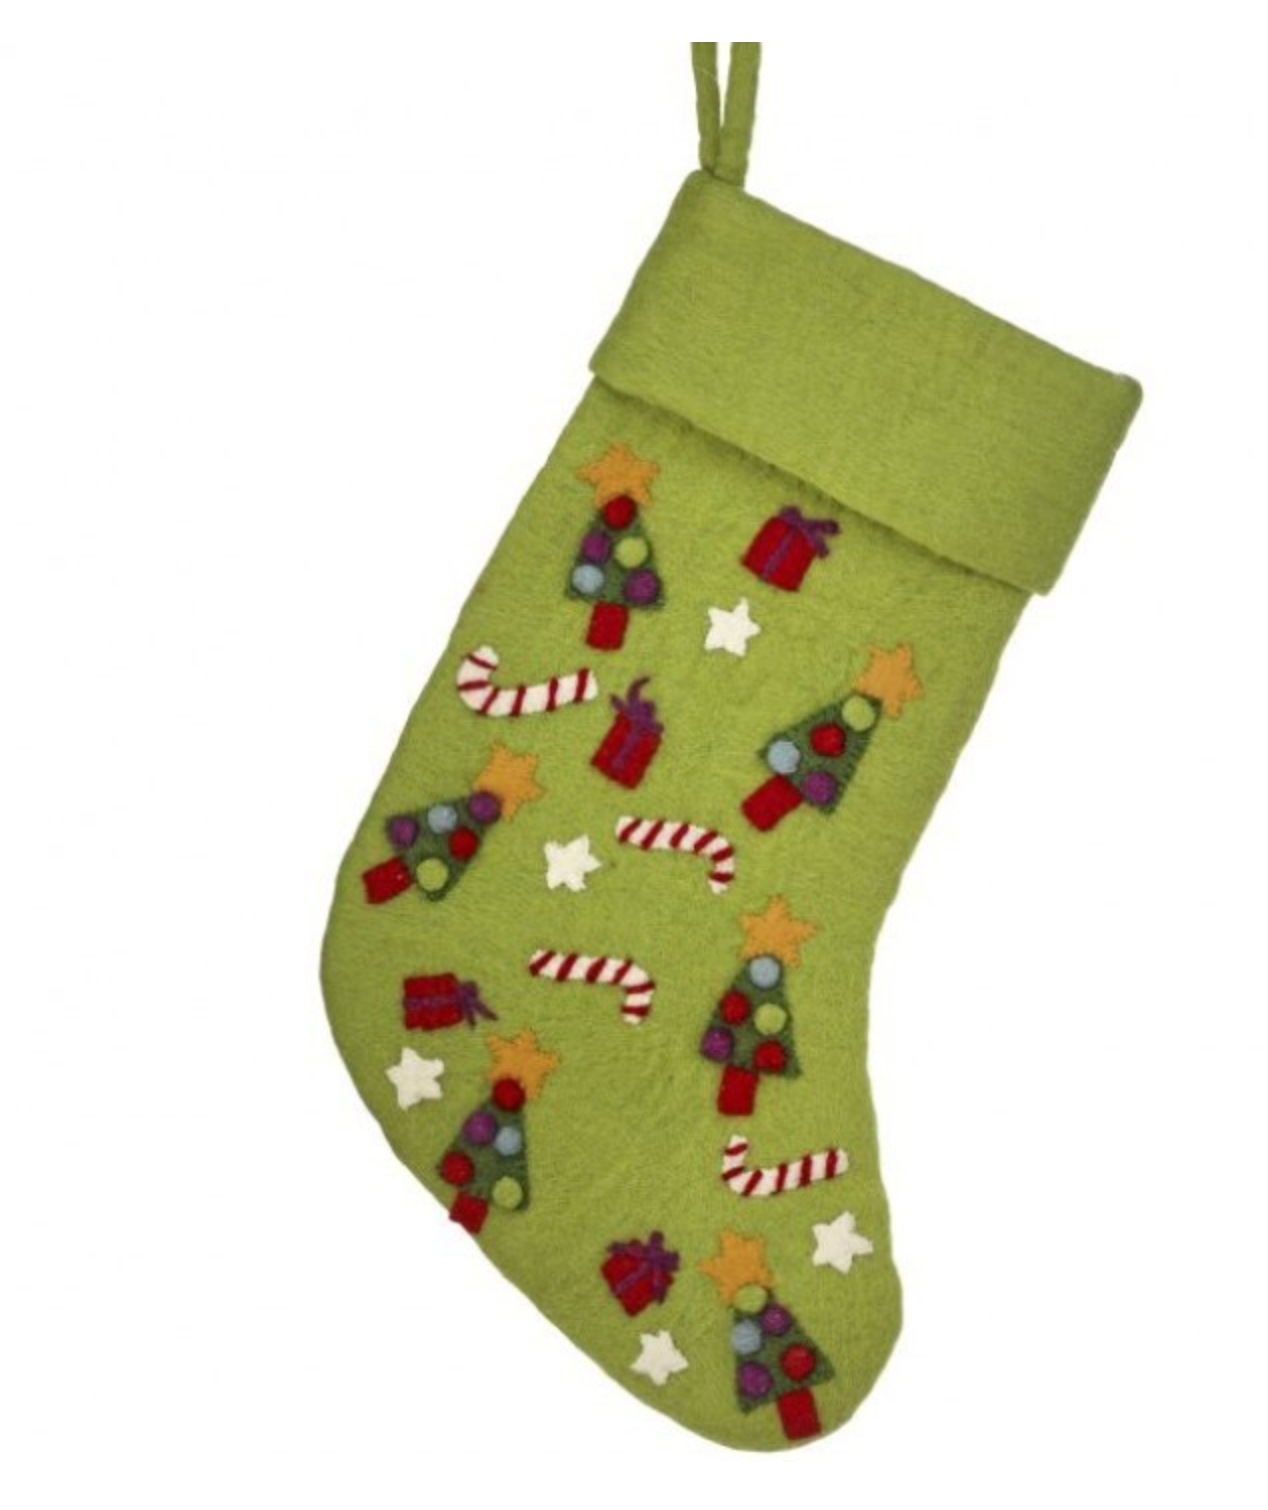 Green Felt Stocking with Candy Canes